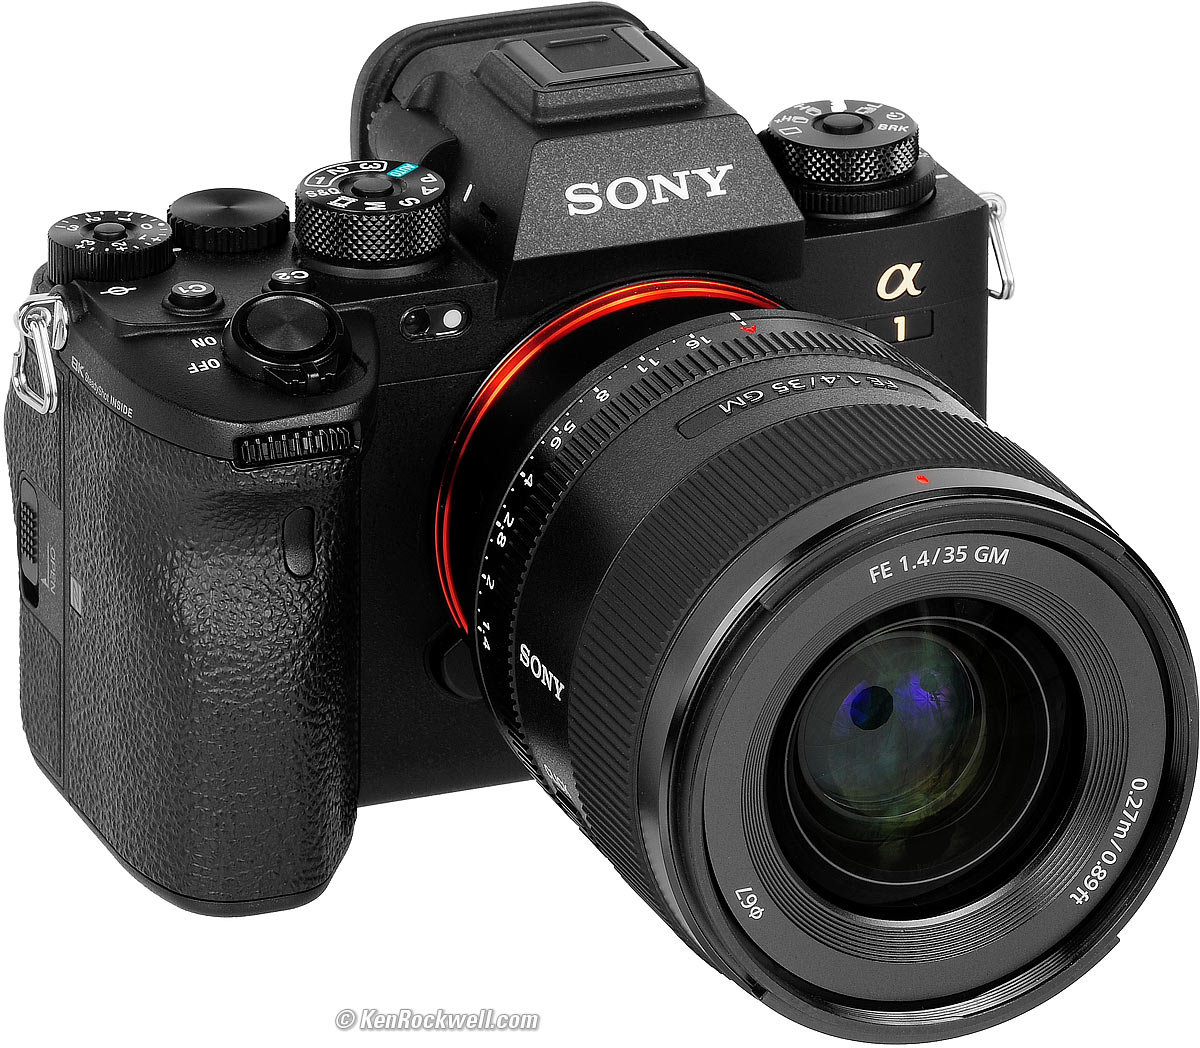 Sony A6100 vs Sony A7 II Detailed Comparison